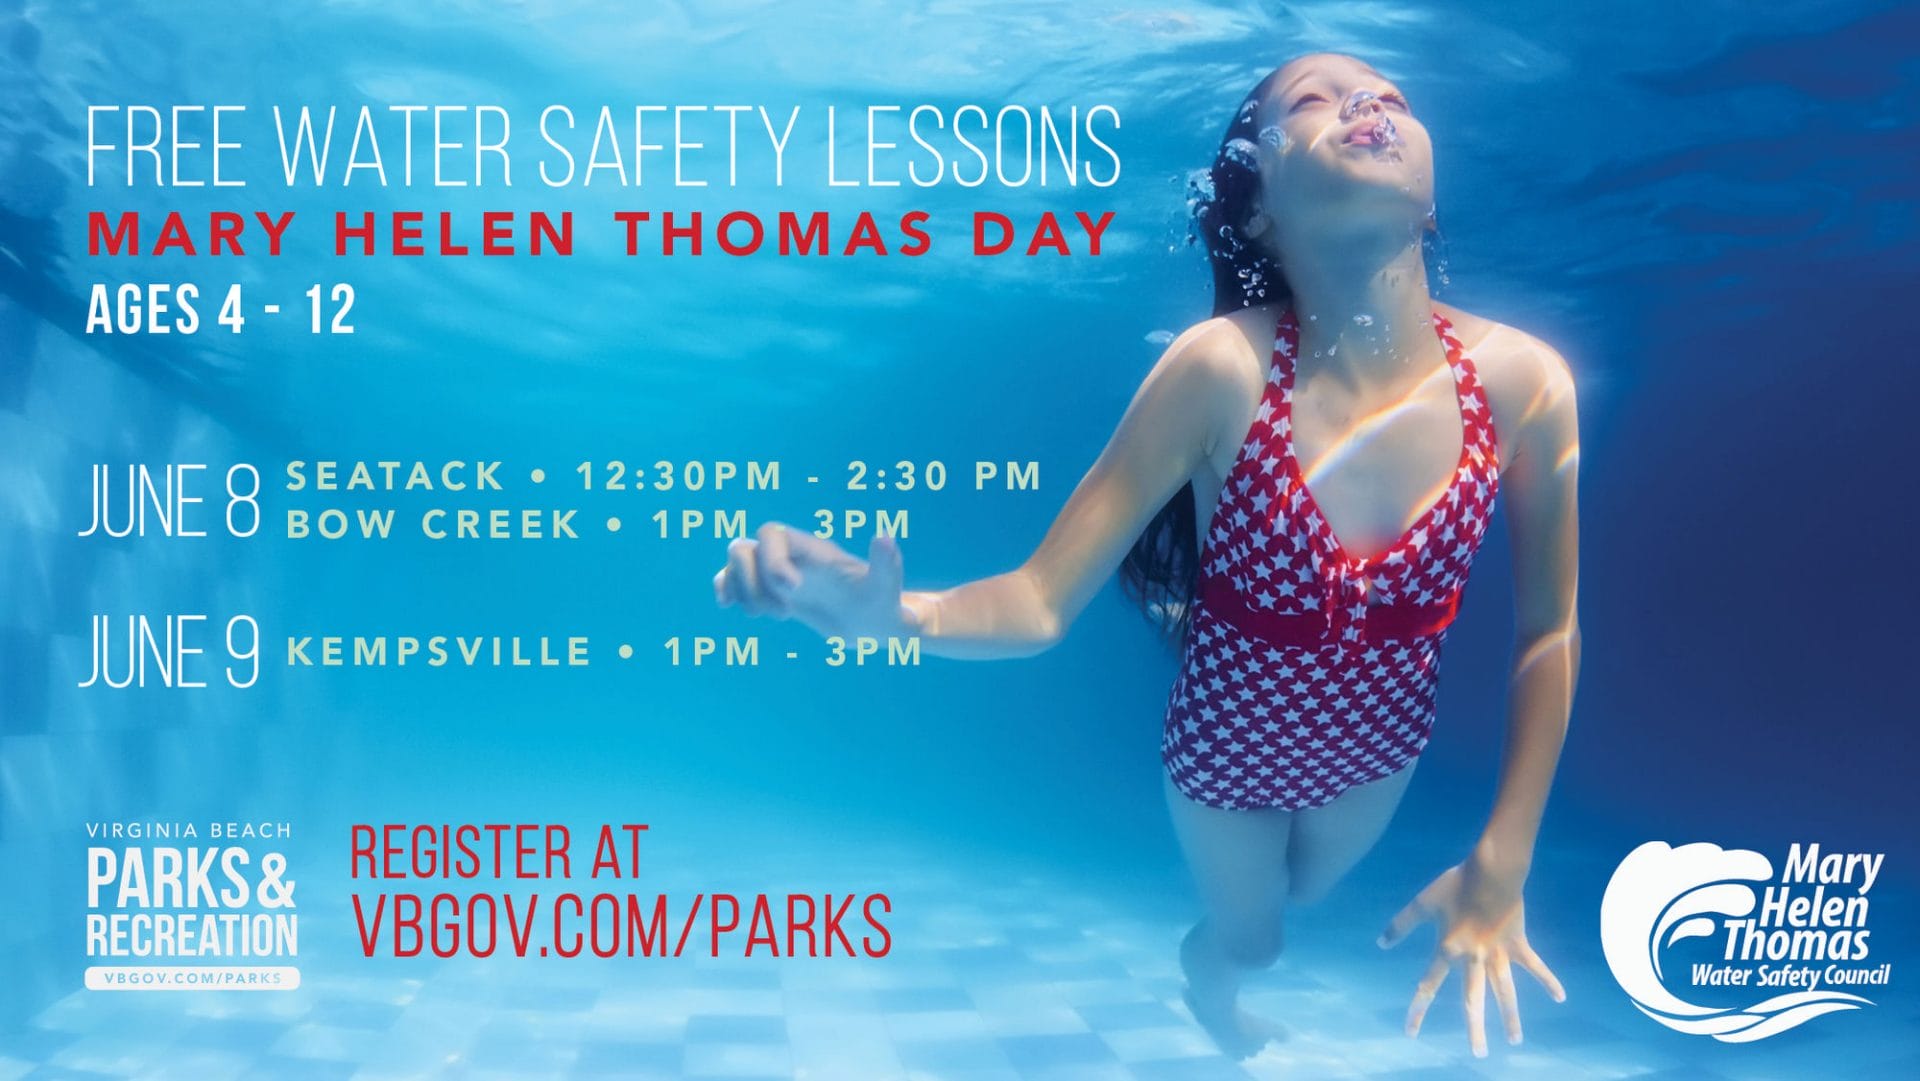 Mary Helen Thomas Day - Free Water Safety Lessons